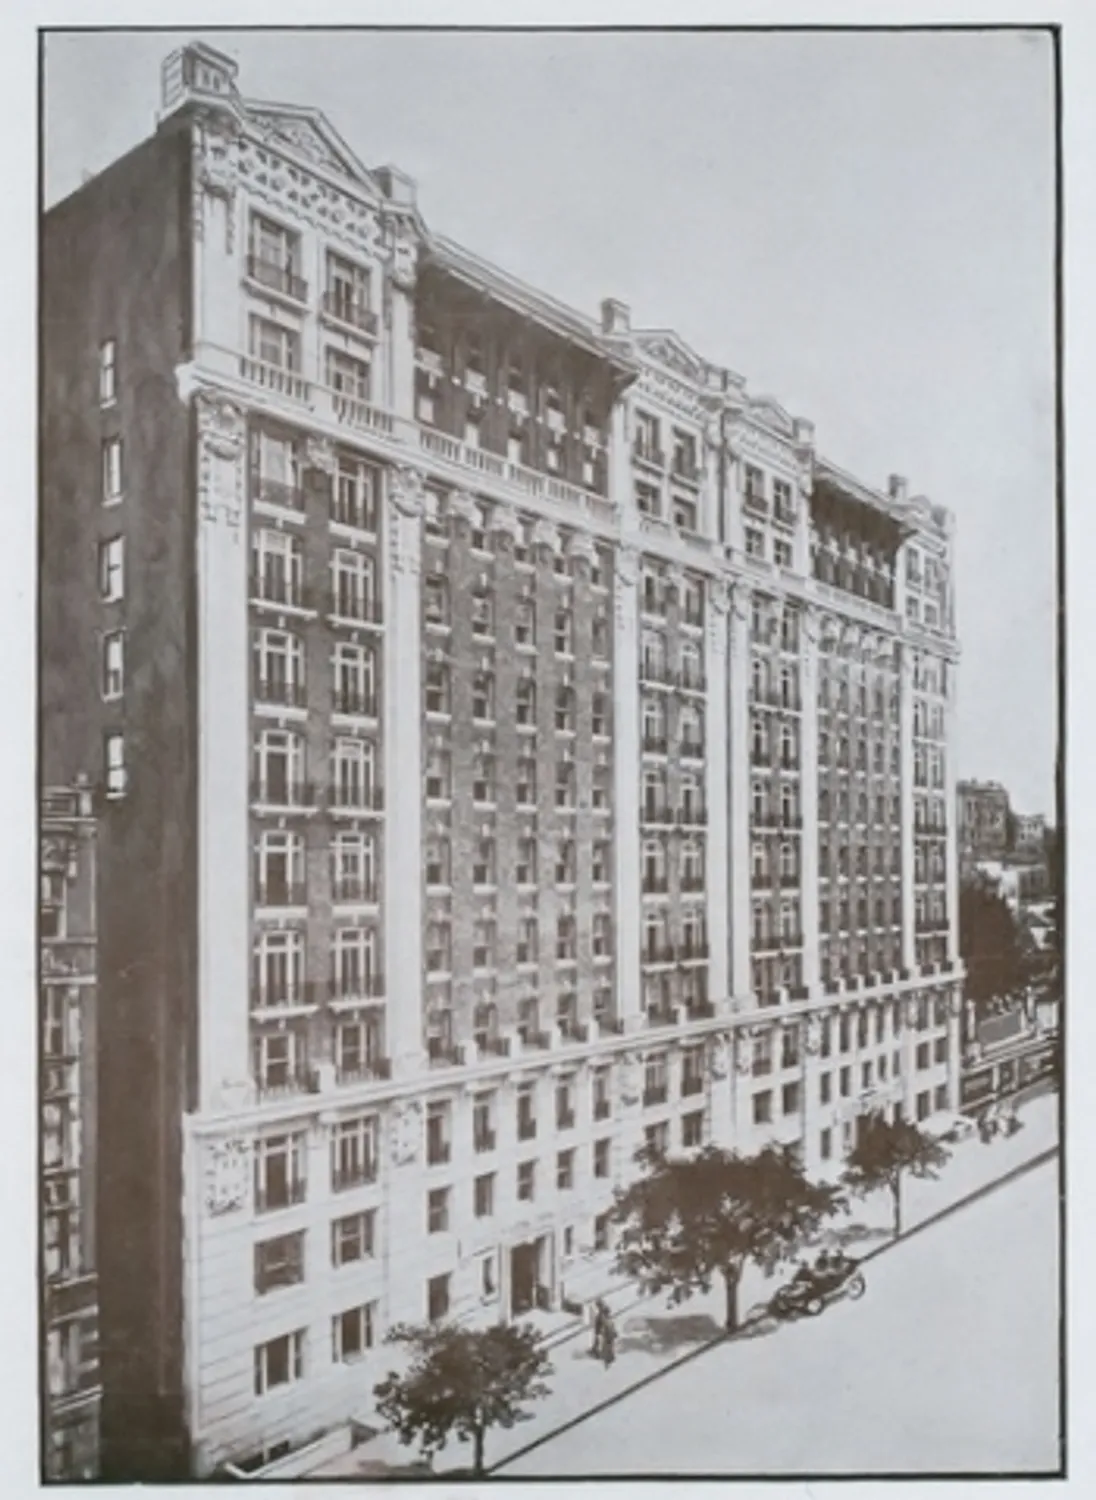 The building in 1909